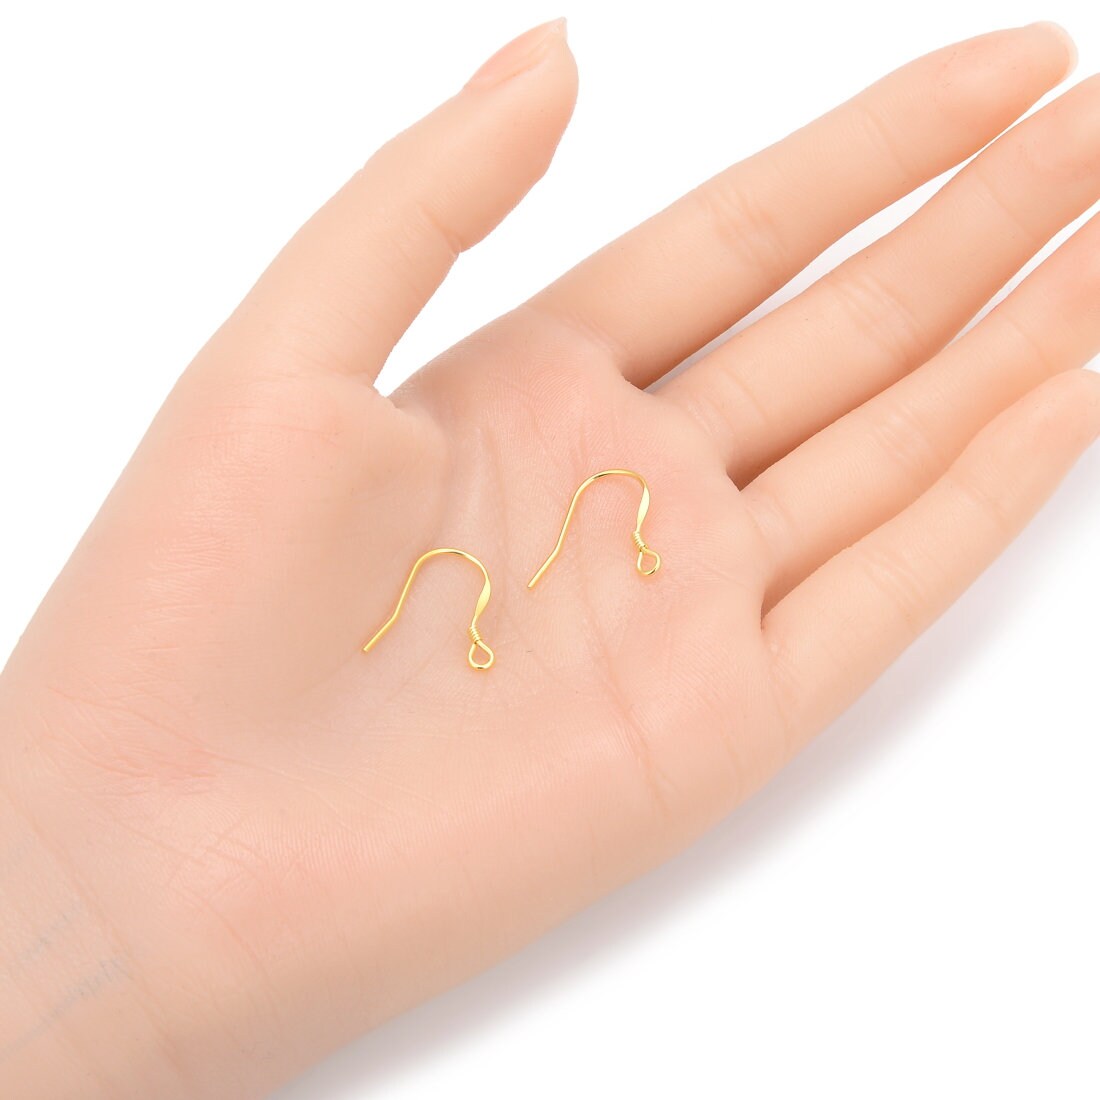 Adabele 100pcs Gold Plated 925 Sterling Silver Open Jump Rings 4mm Small Connector (Thin Wire 0.5mm / 24 Gauge) for Jewelry Craft